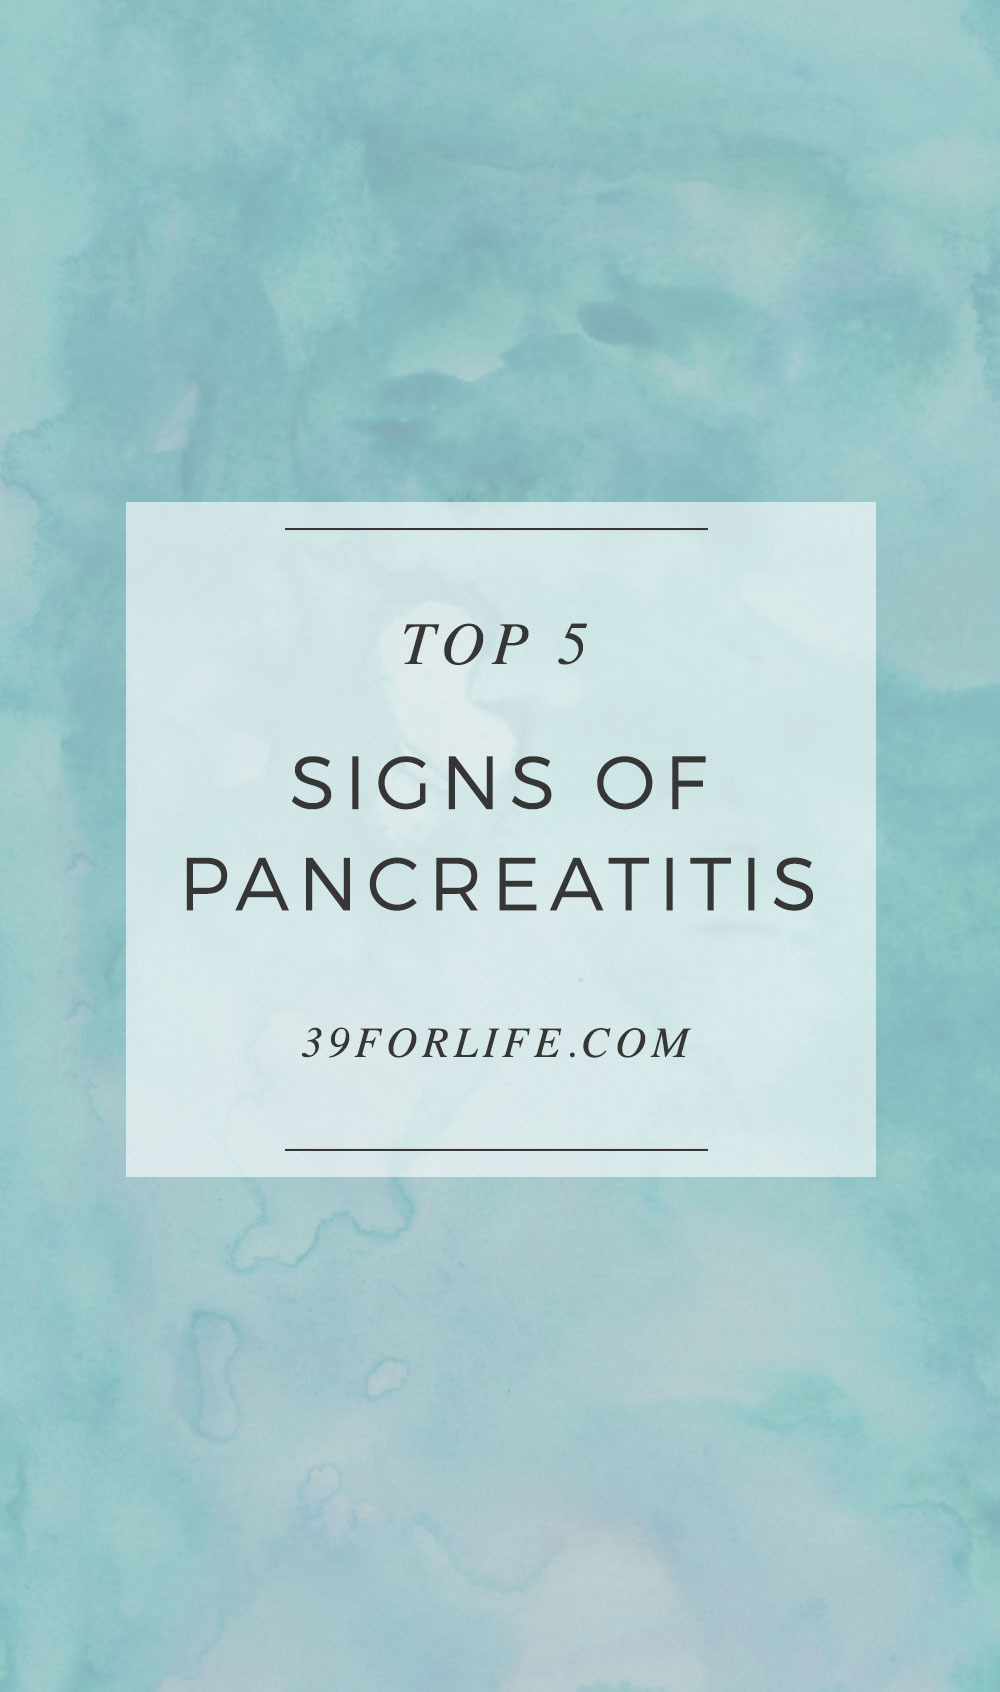 Pancreatitis can be notoriously tricky to diagnose. Here are the top five symptoms of pancreatitis you should see your doctor about.